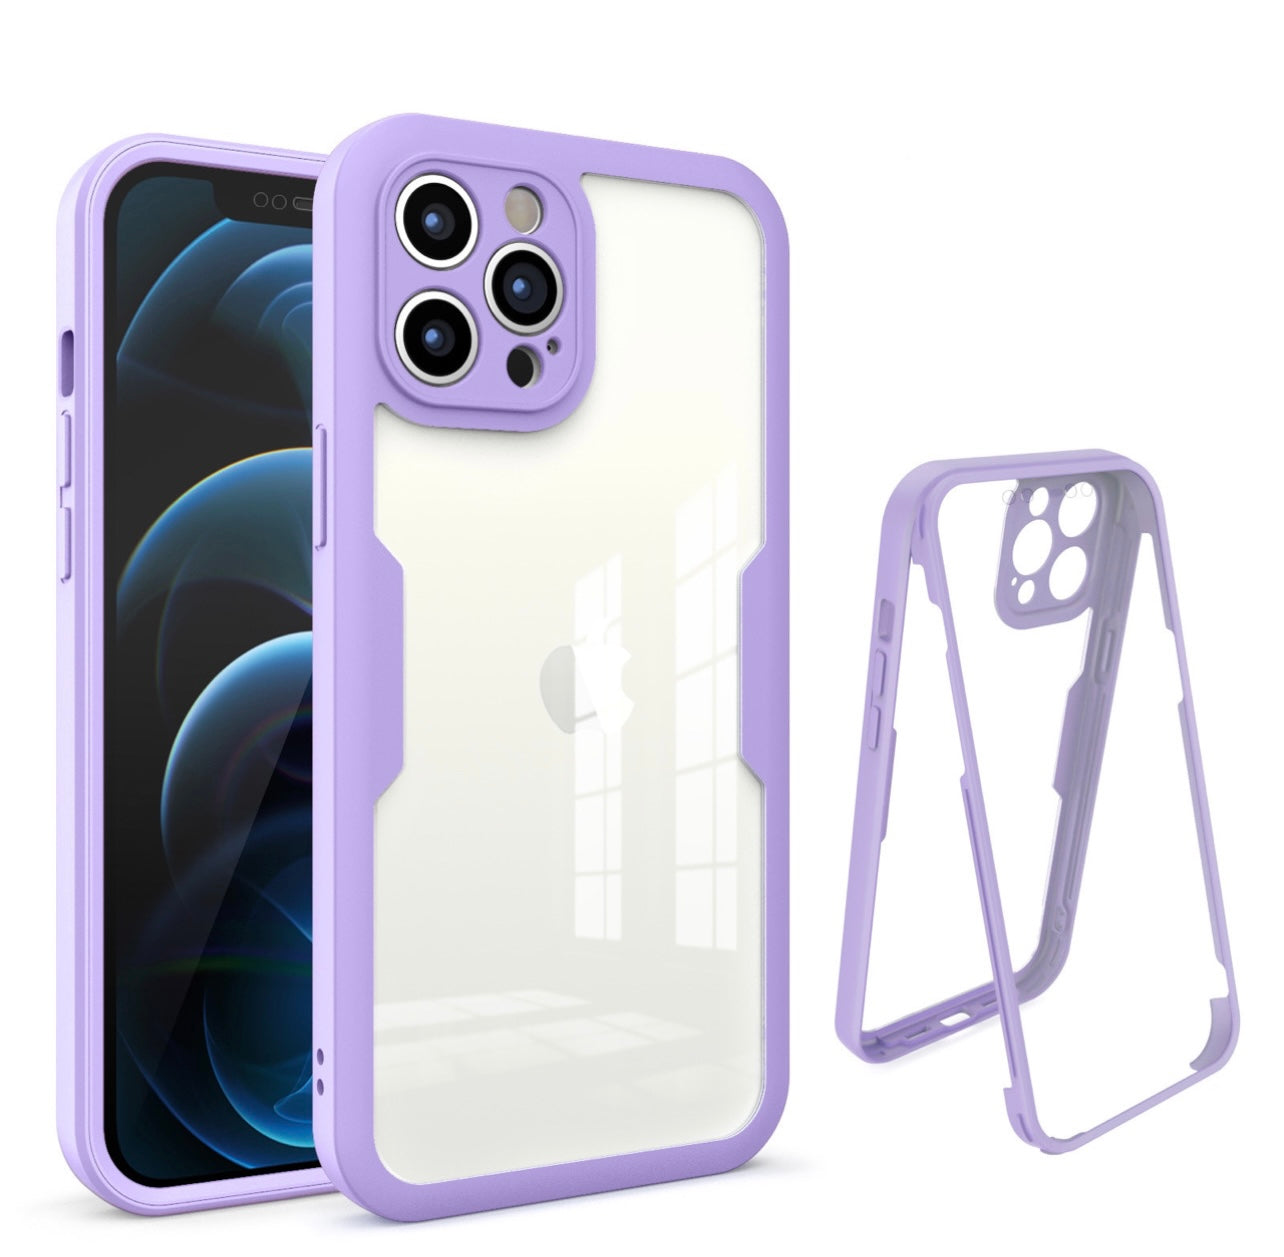 2 in 1 Purple transparent protective cover Case For iPhones